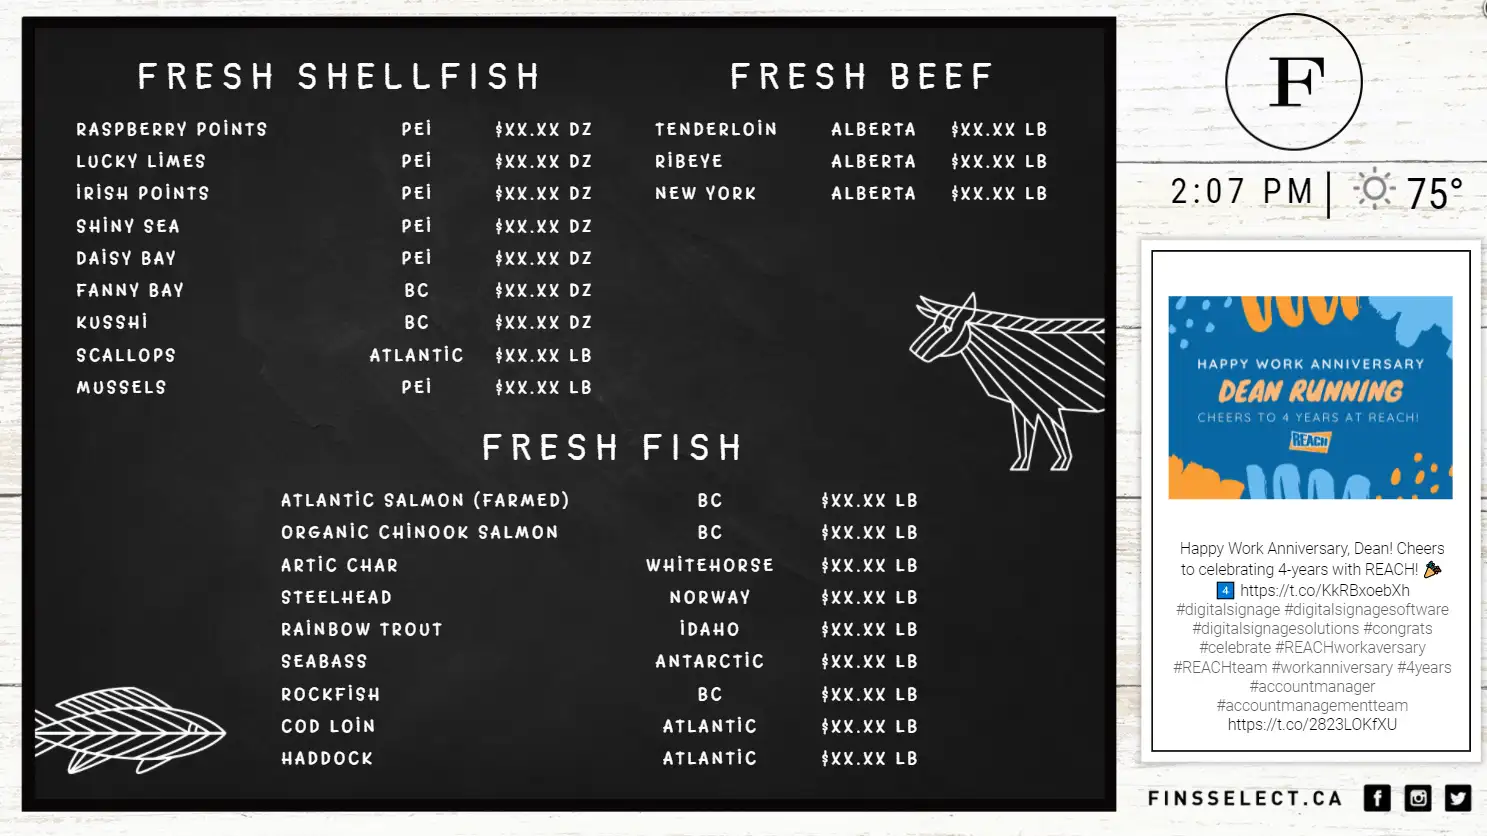 Black and white menu board digital signage for Fin's Select Meats and Seafood